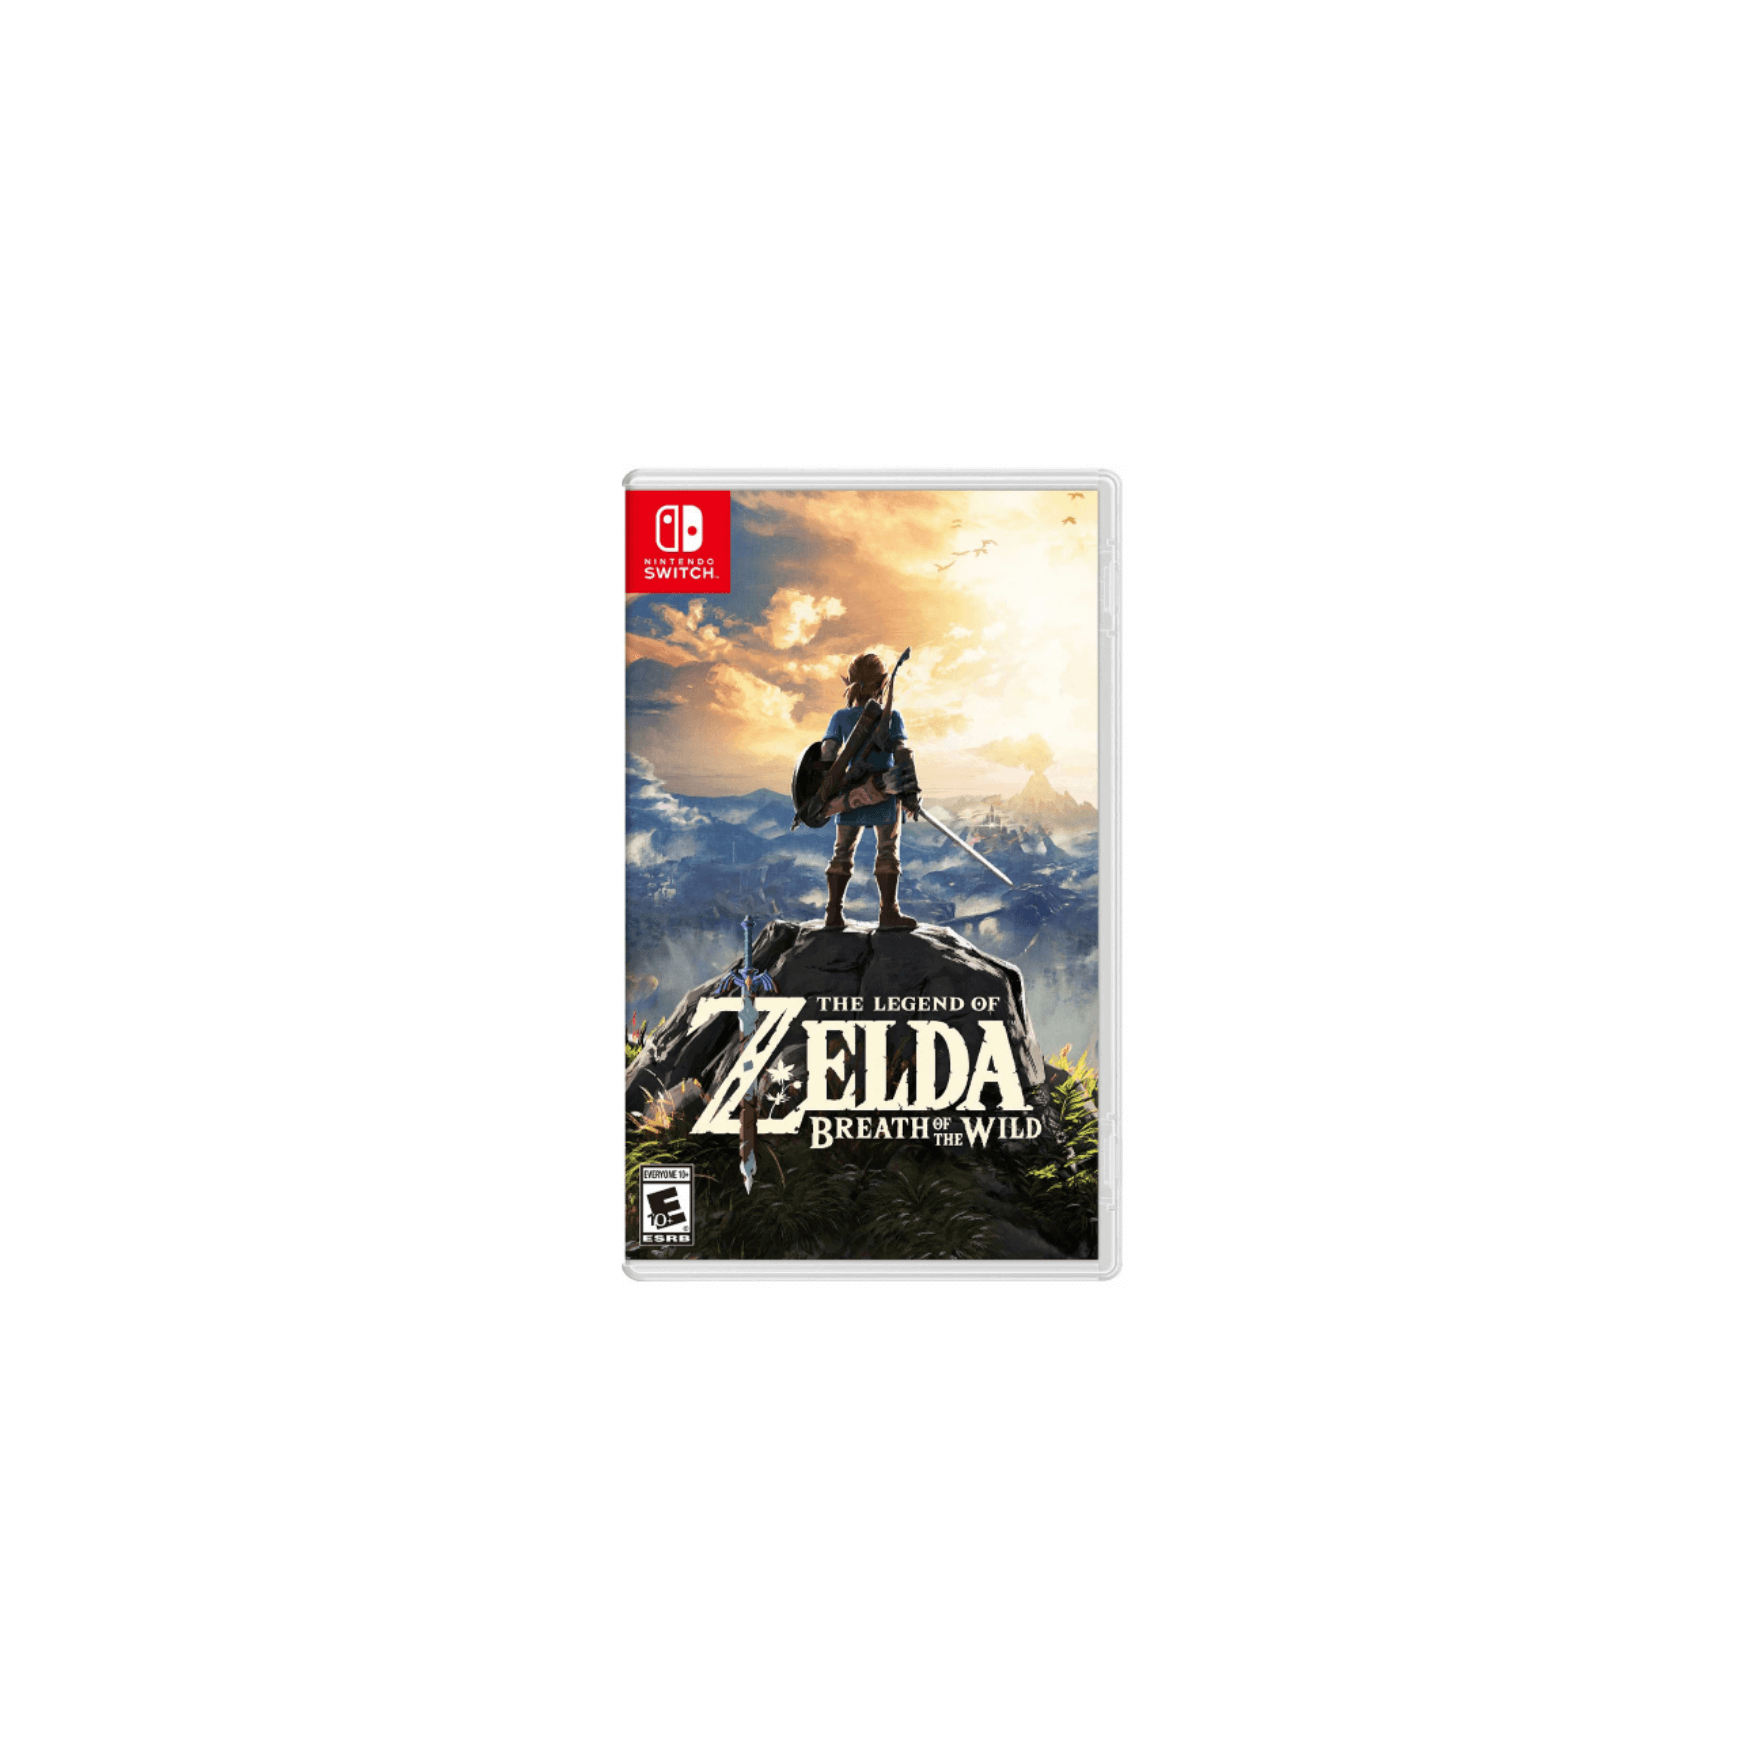 Nintendo Switch Game The Legend Of Zelda: Breath Of The Wild - for Nintendo Switch